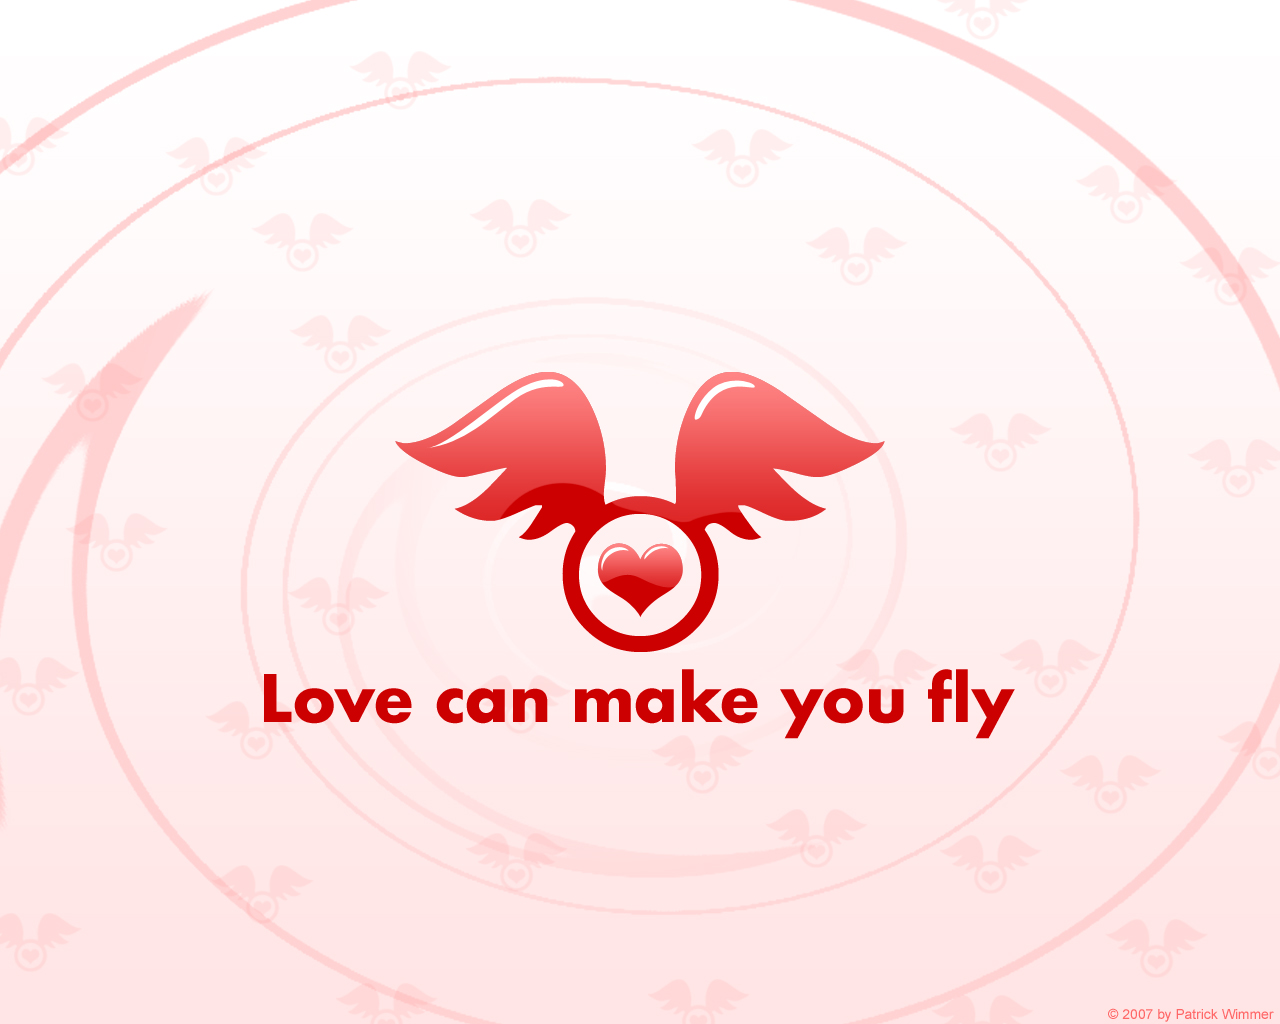 Love can make you fly